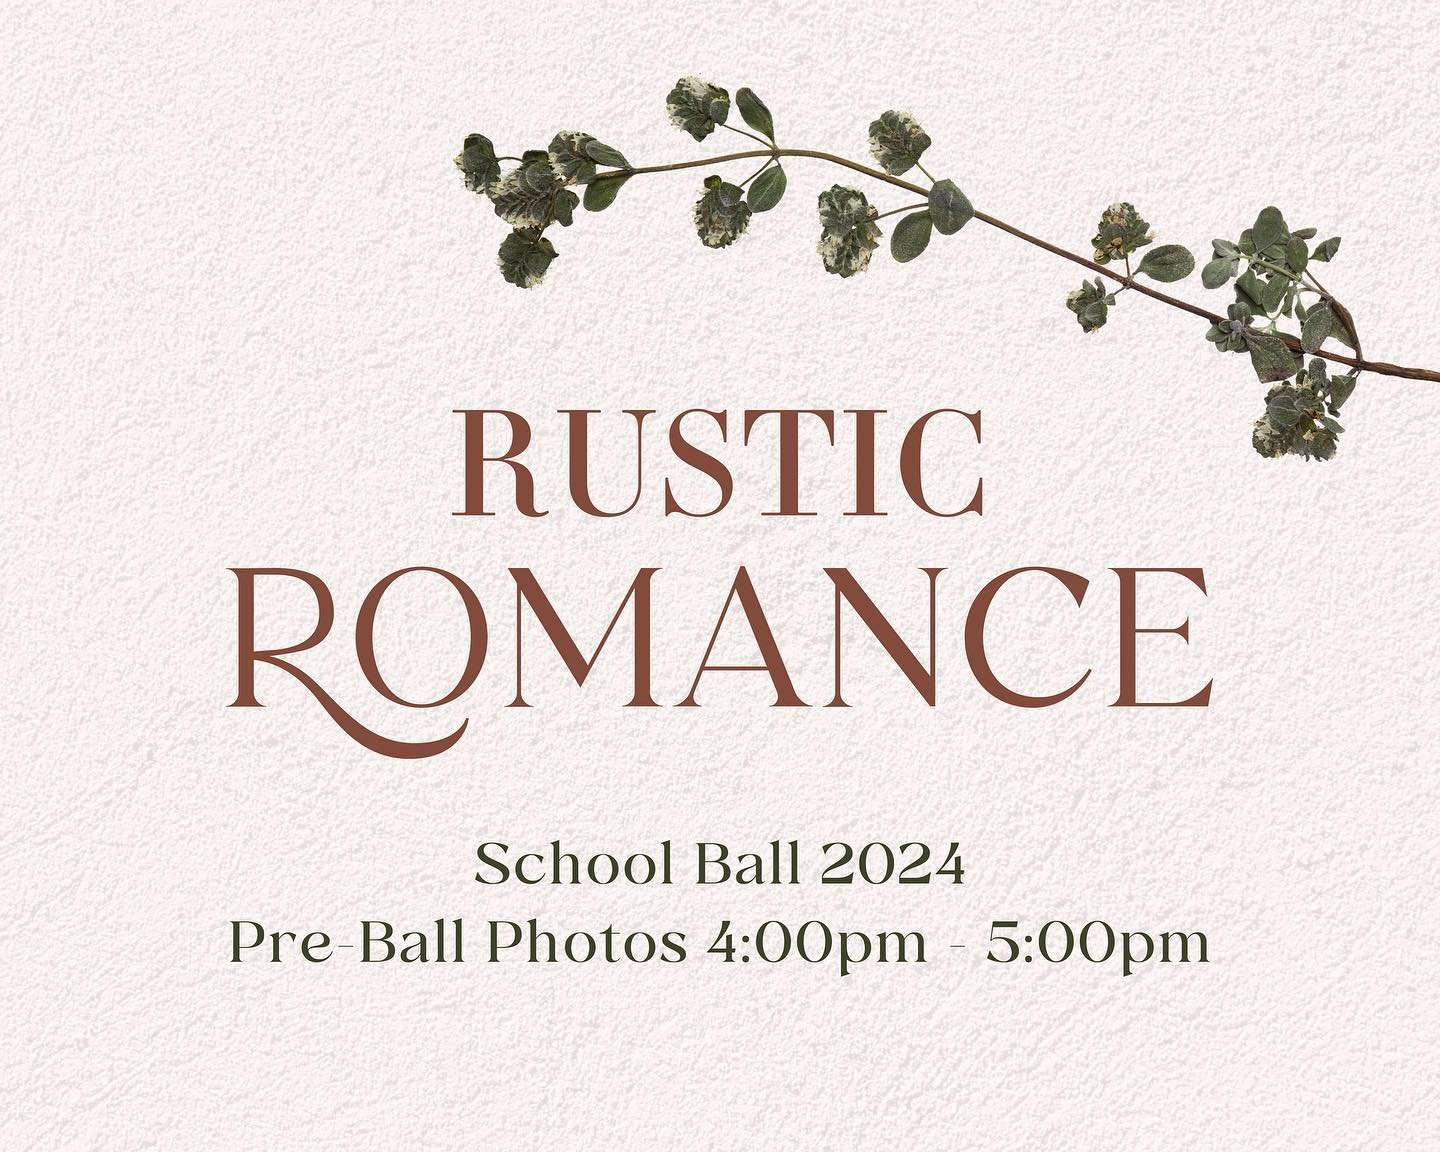 1 more sleep to go before our College Ball tomorrow. 💃 We can&rsquo;t wait to see you all dressed in your best and ready to dance the night away. Pre-ball photos will start at 4pm at the College, swipe through the carousel to view a map of the Colle